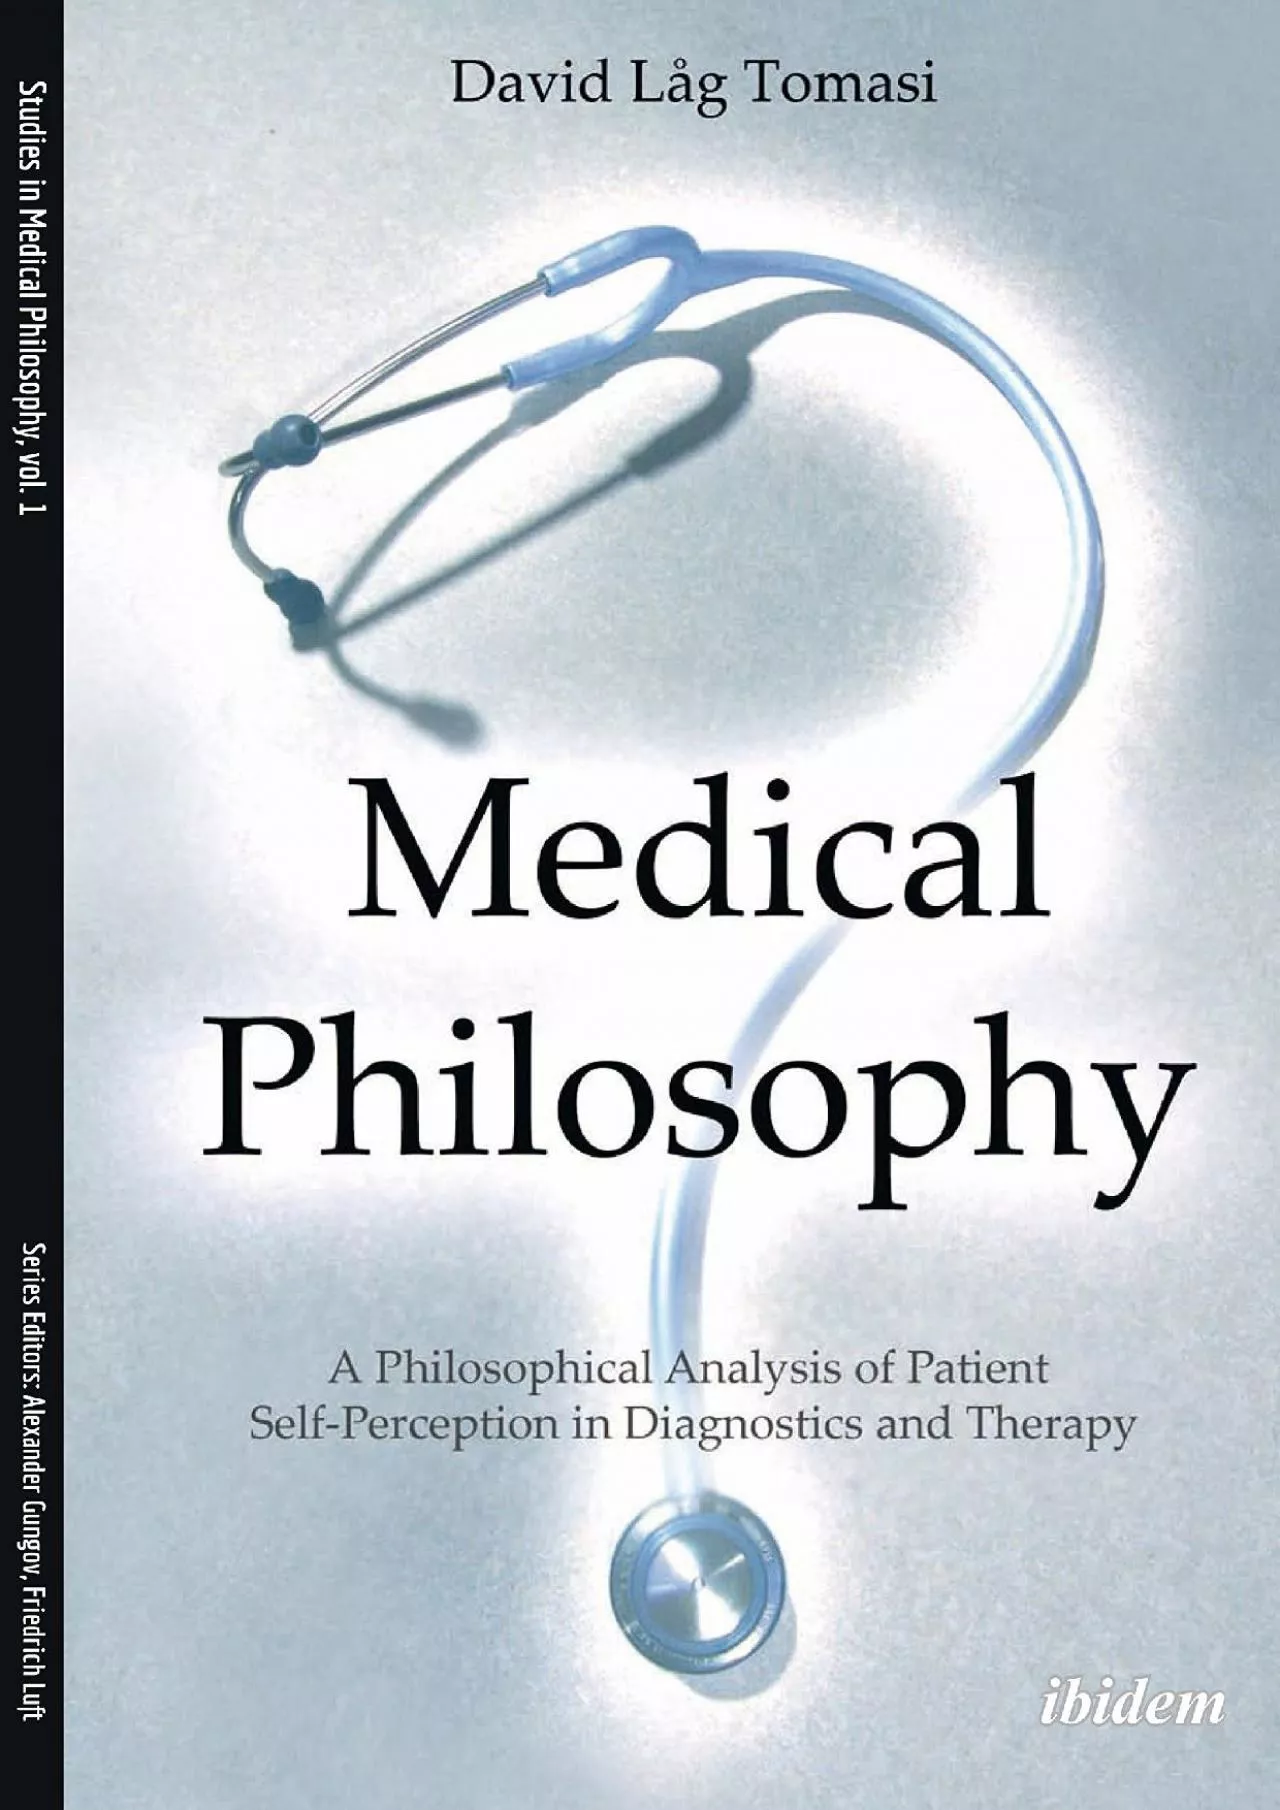 (DOWNLOAD)-Medical Philosophy: A Philosophical Analysis of Patient Self-Perception in